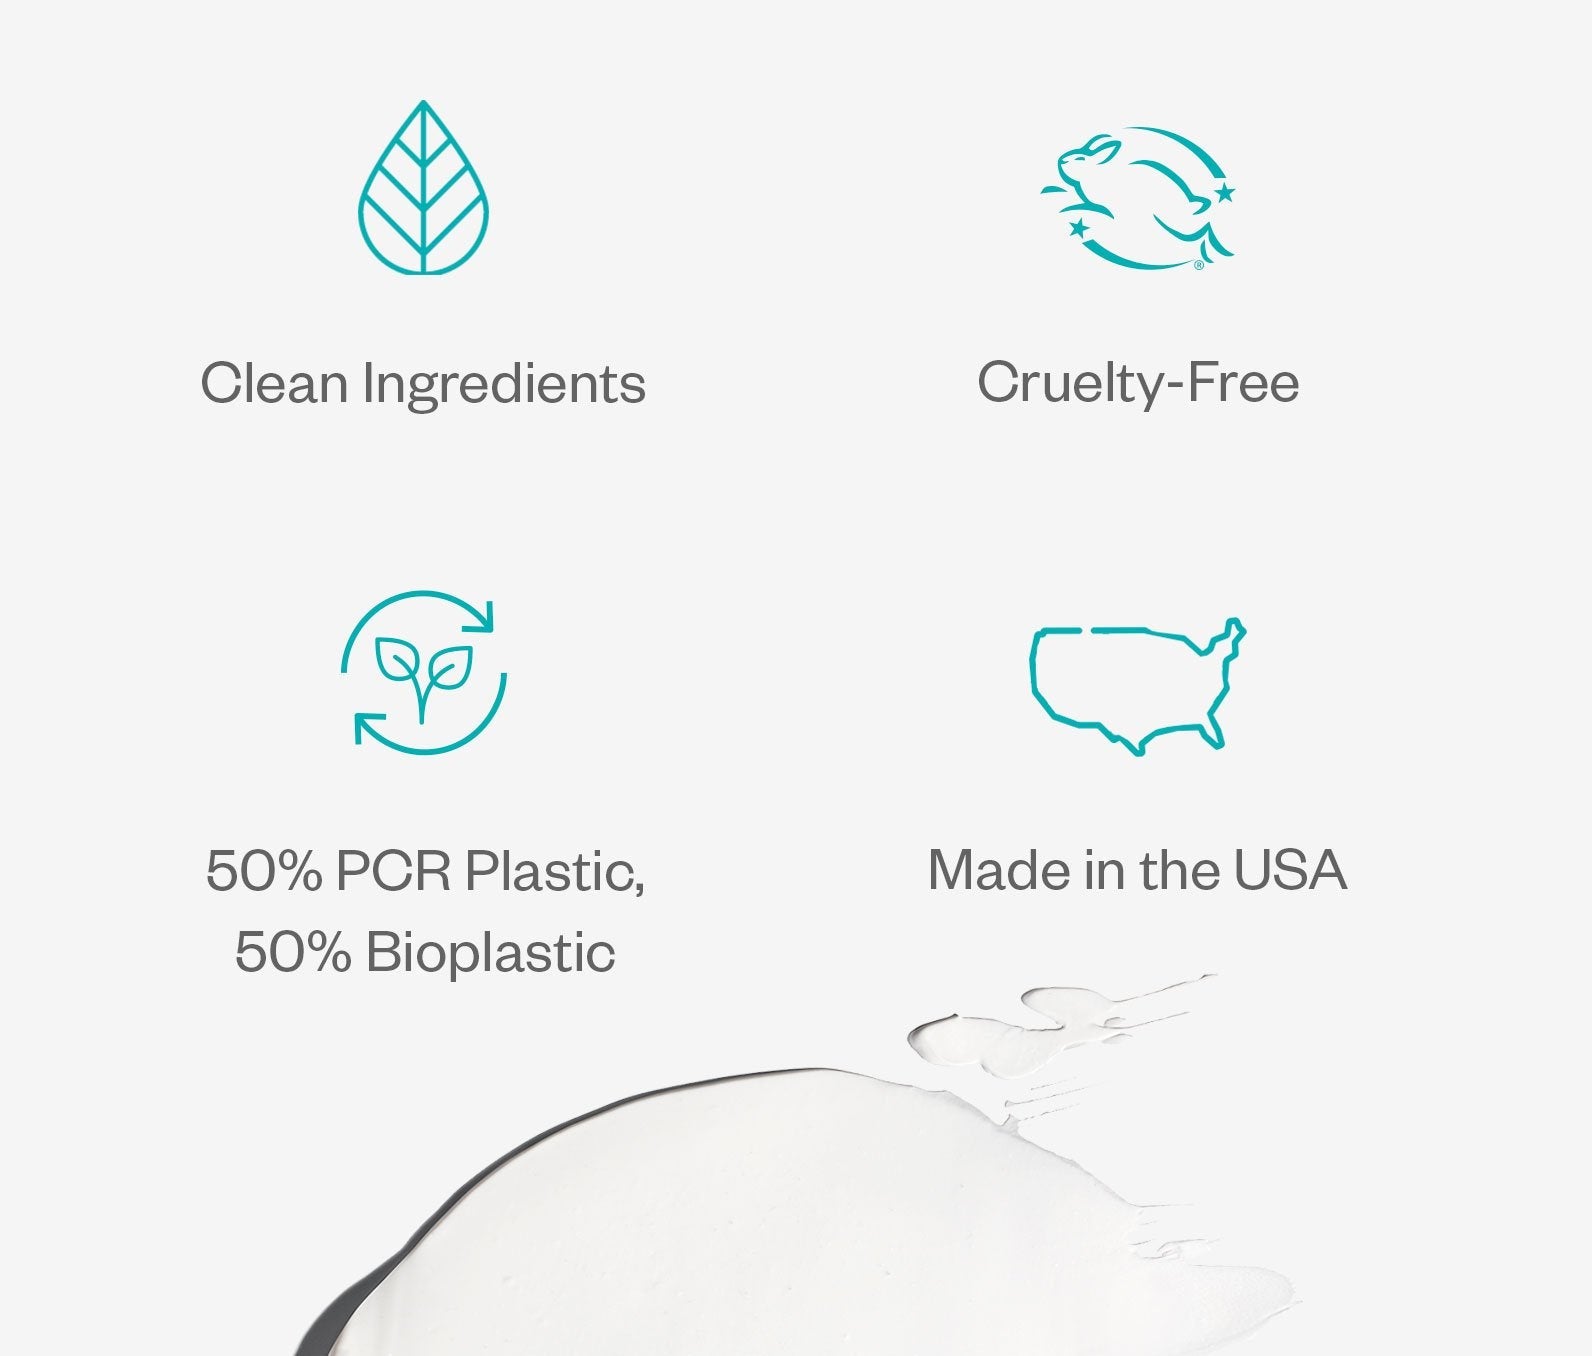 A graphic depicting the benefits of Ursa Major Stellar Shave Cream. Benefits include: Clean ingredients, cruelty-free, 50% PCR Plastic & 50% Bioplastic, and Made in the USA.